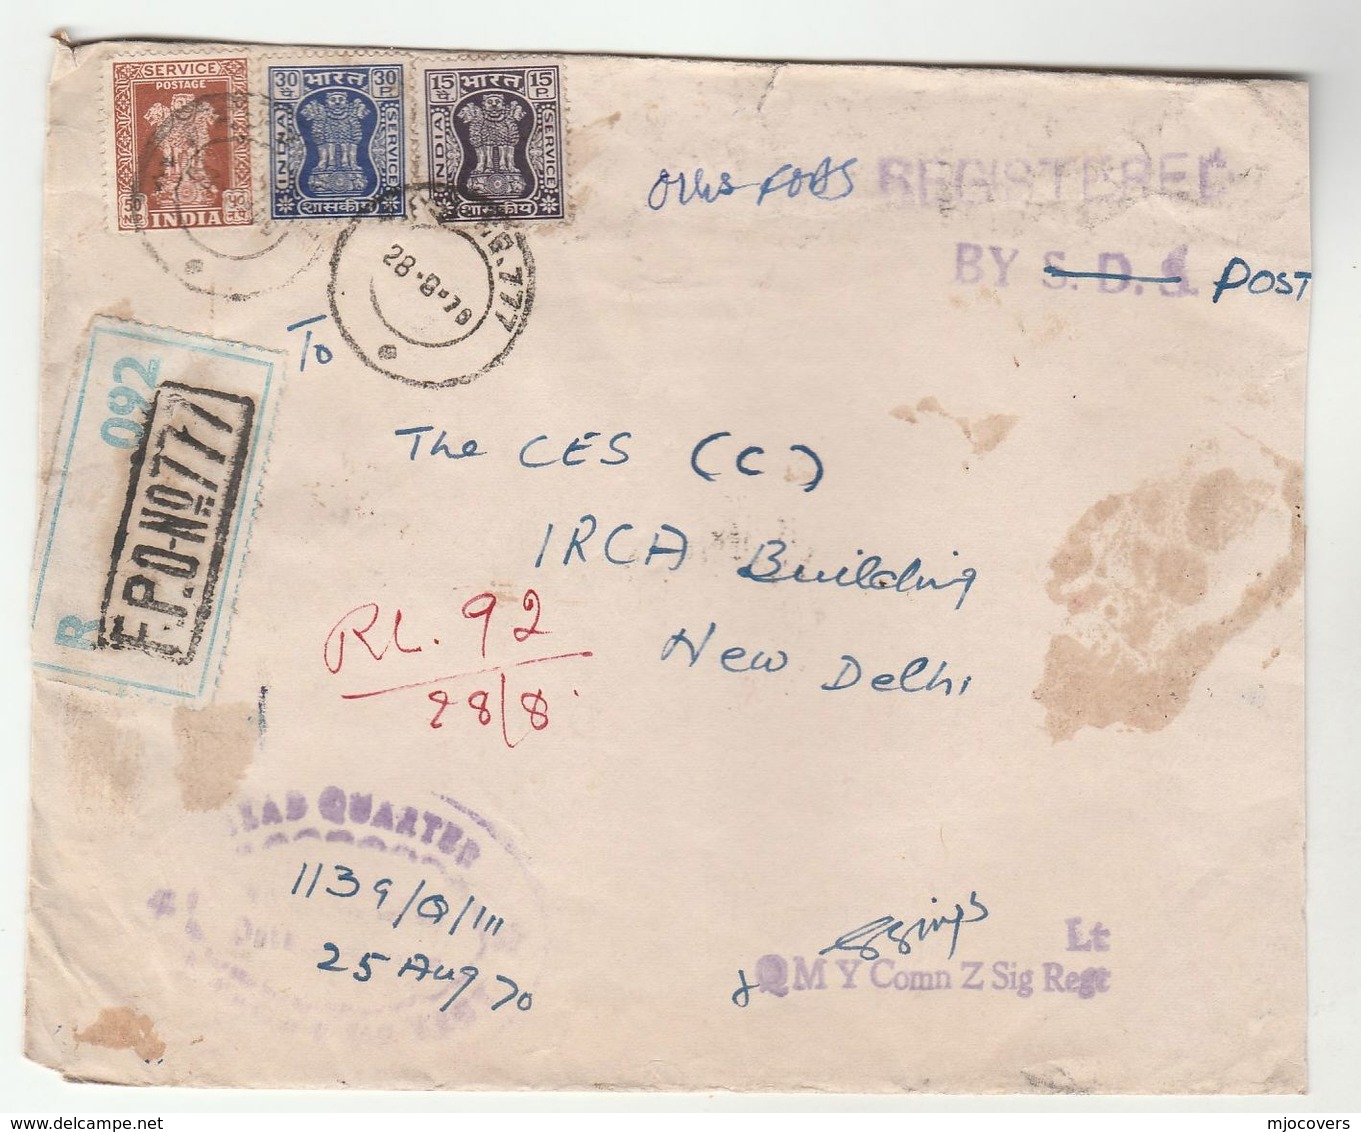 1970 Registered FPO 777 Cover QMY COMN Z SIG REGT  INDIA Military Forces Stamps Communication Signals - Covers & Documents